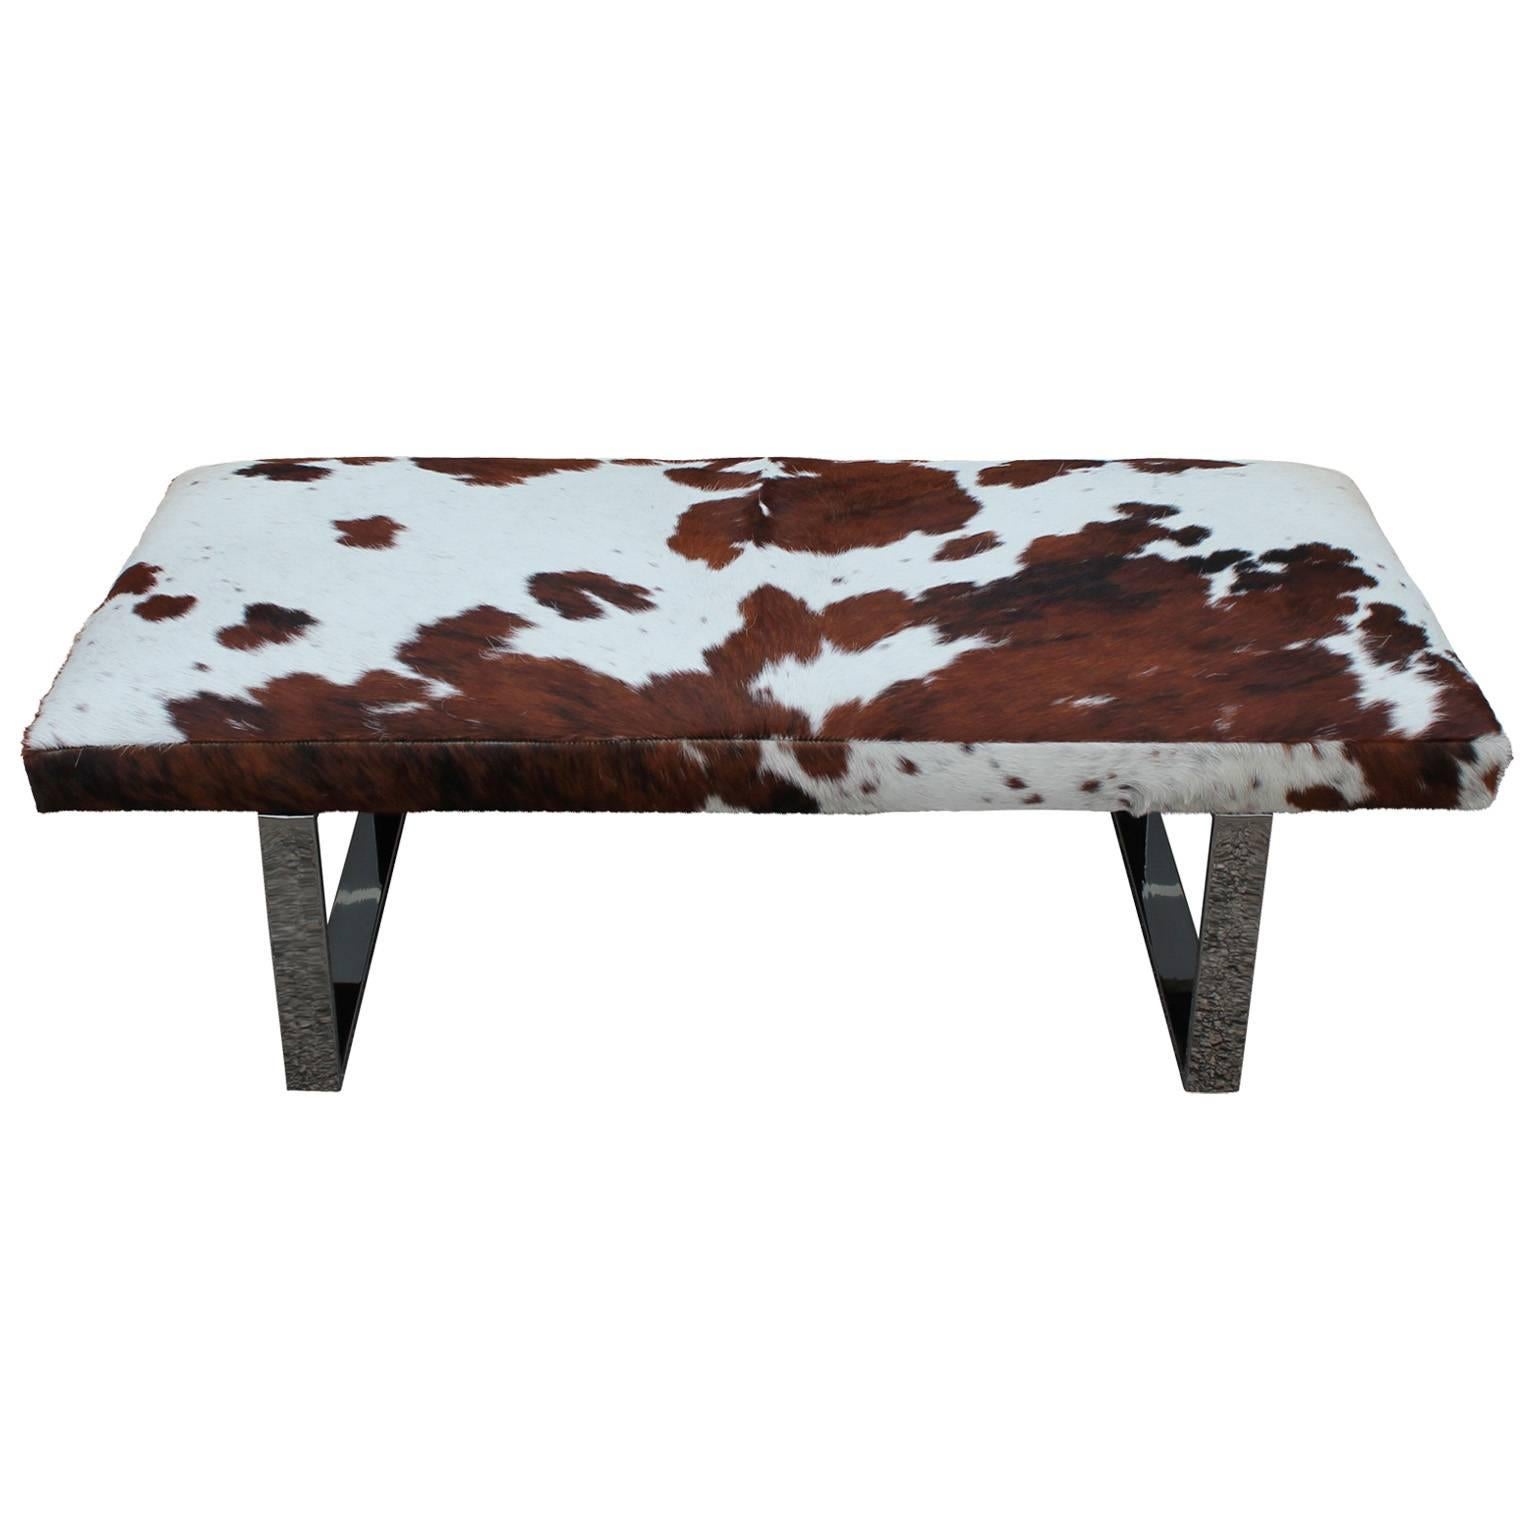 Gorgeous custom bench or ottoman with shiny chrome legs. Bench is topped with silky cowhide in brown and white. 